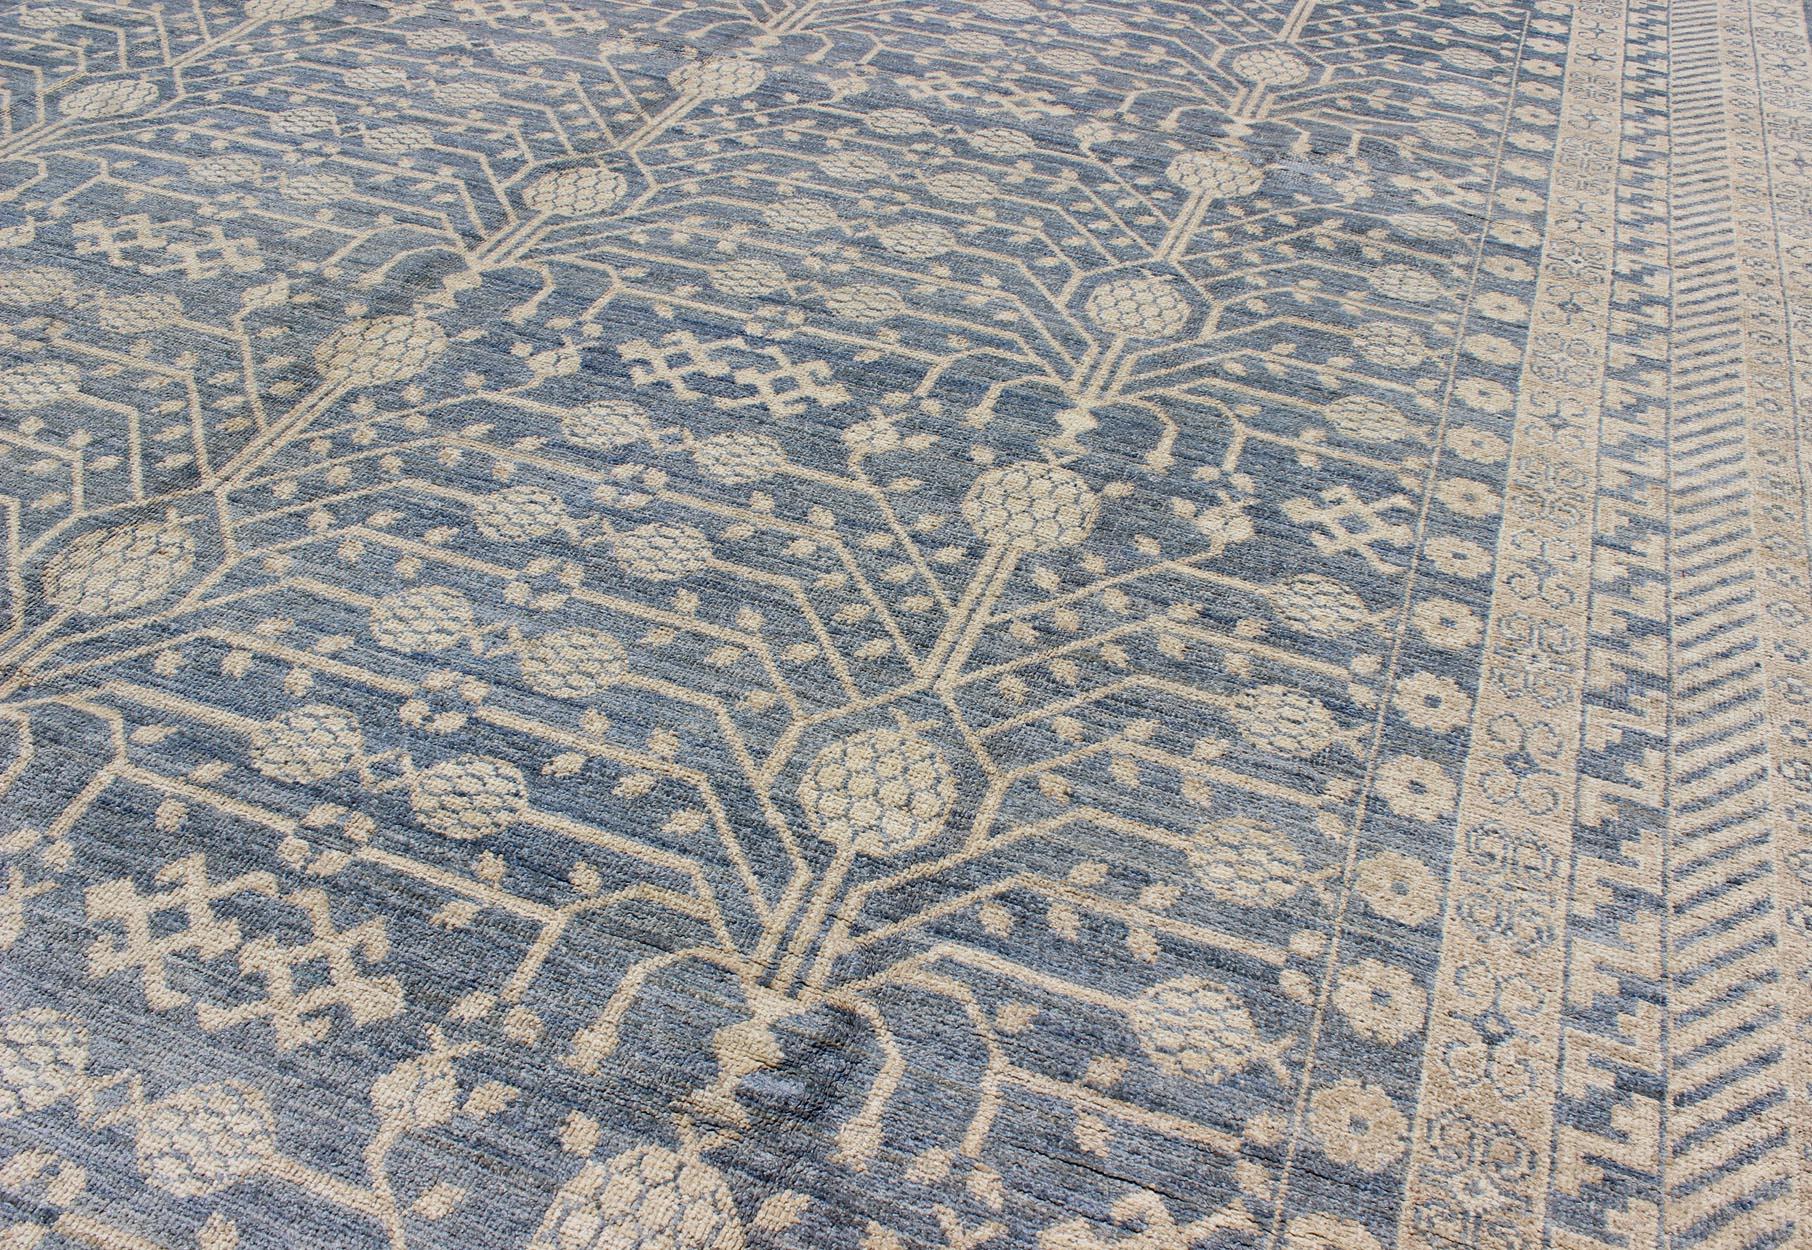 Khotan Design Rug with All-Over Pomegranate Pattern in Blue, Tan & Taupe In Excellent Condition For Sale In Atlanta, GA